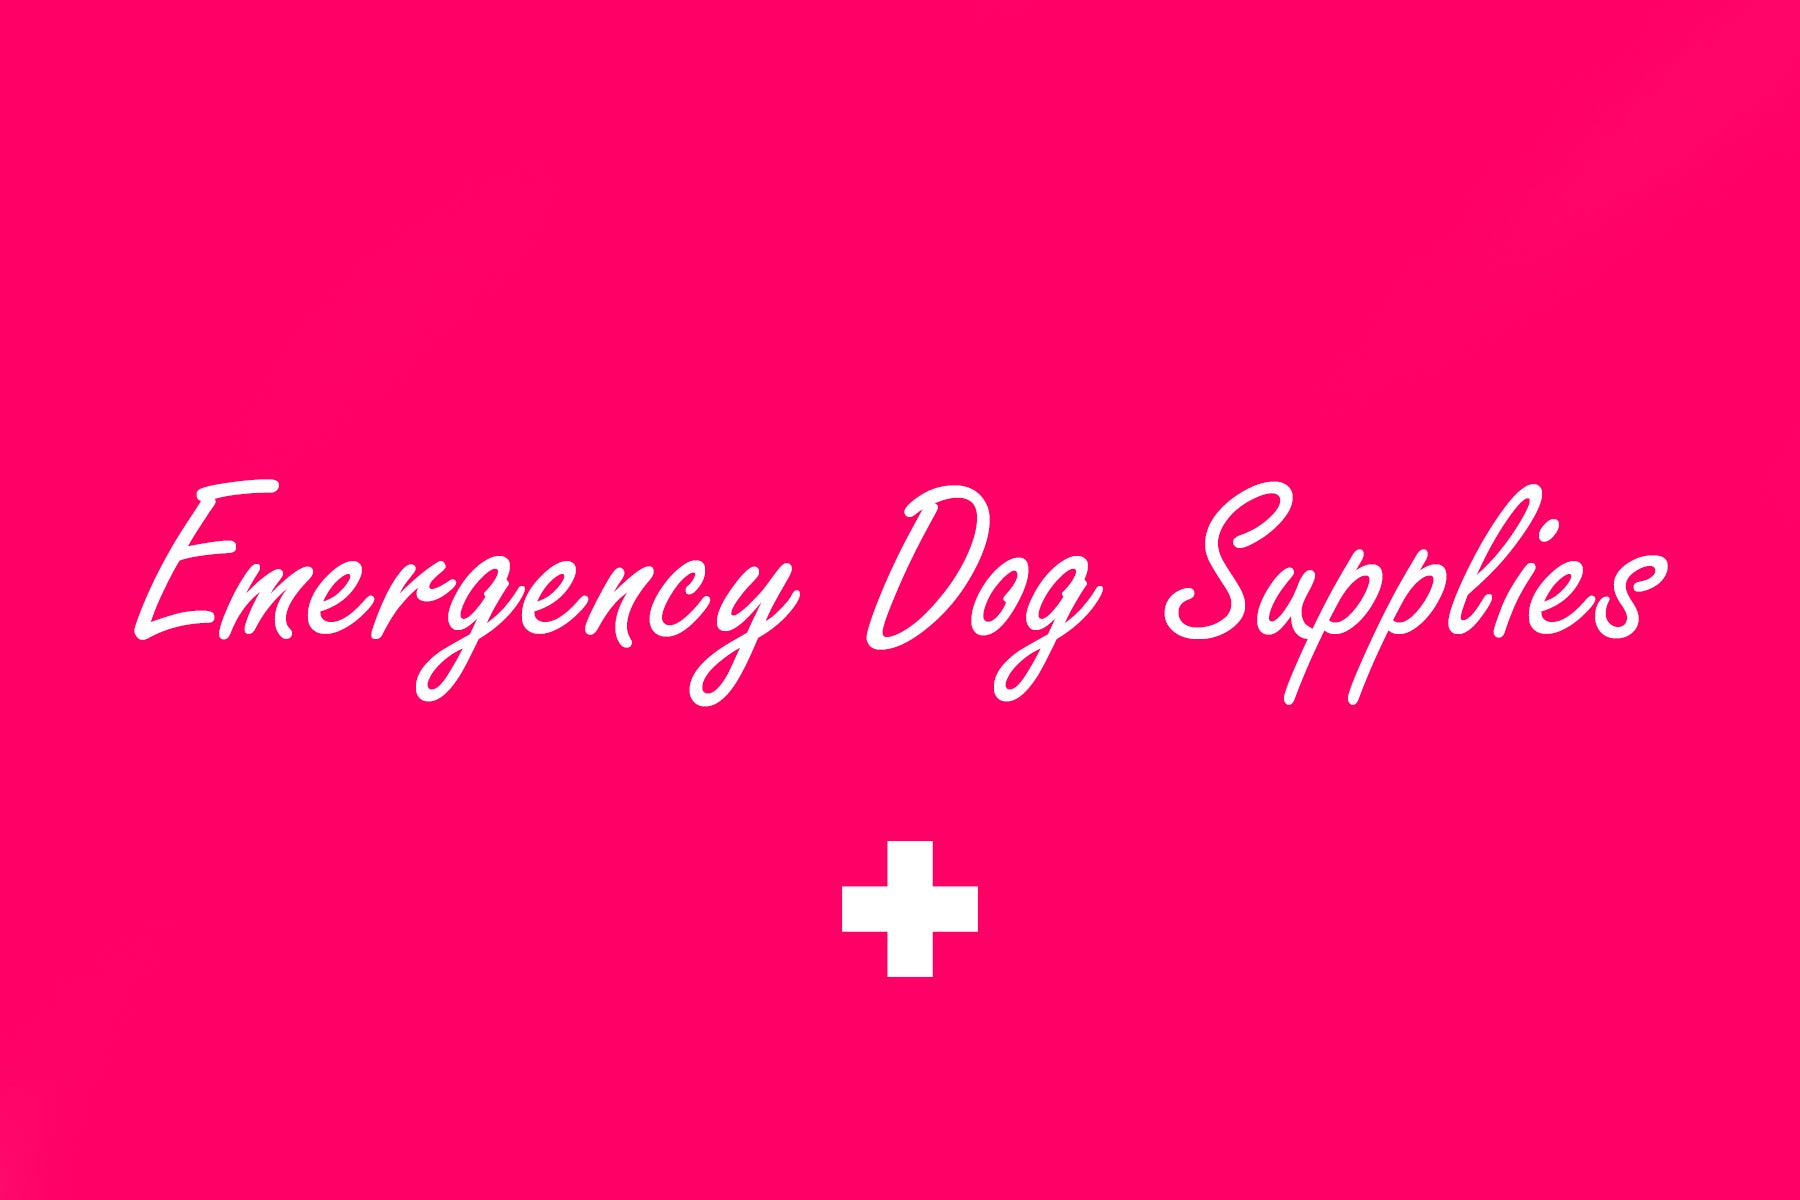 Emergency Dog Supplies now available